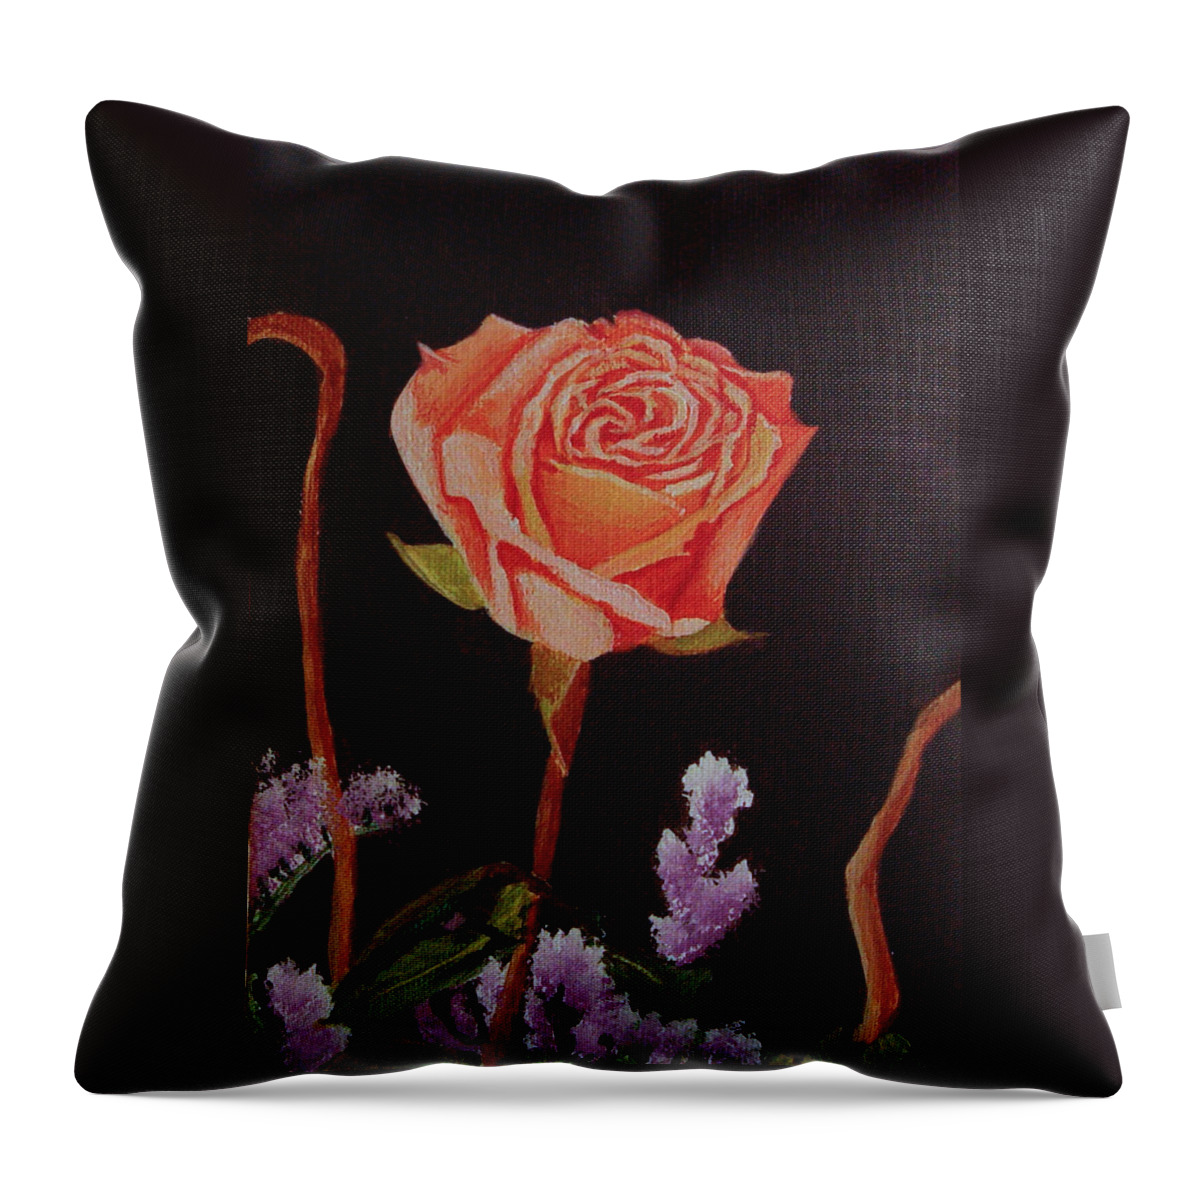 Rose Throw Pillow featuring the painting Single Rose by Quwatha Valentine